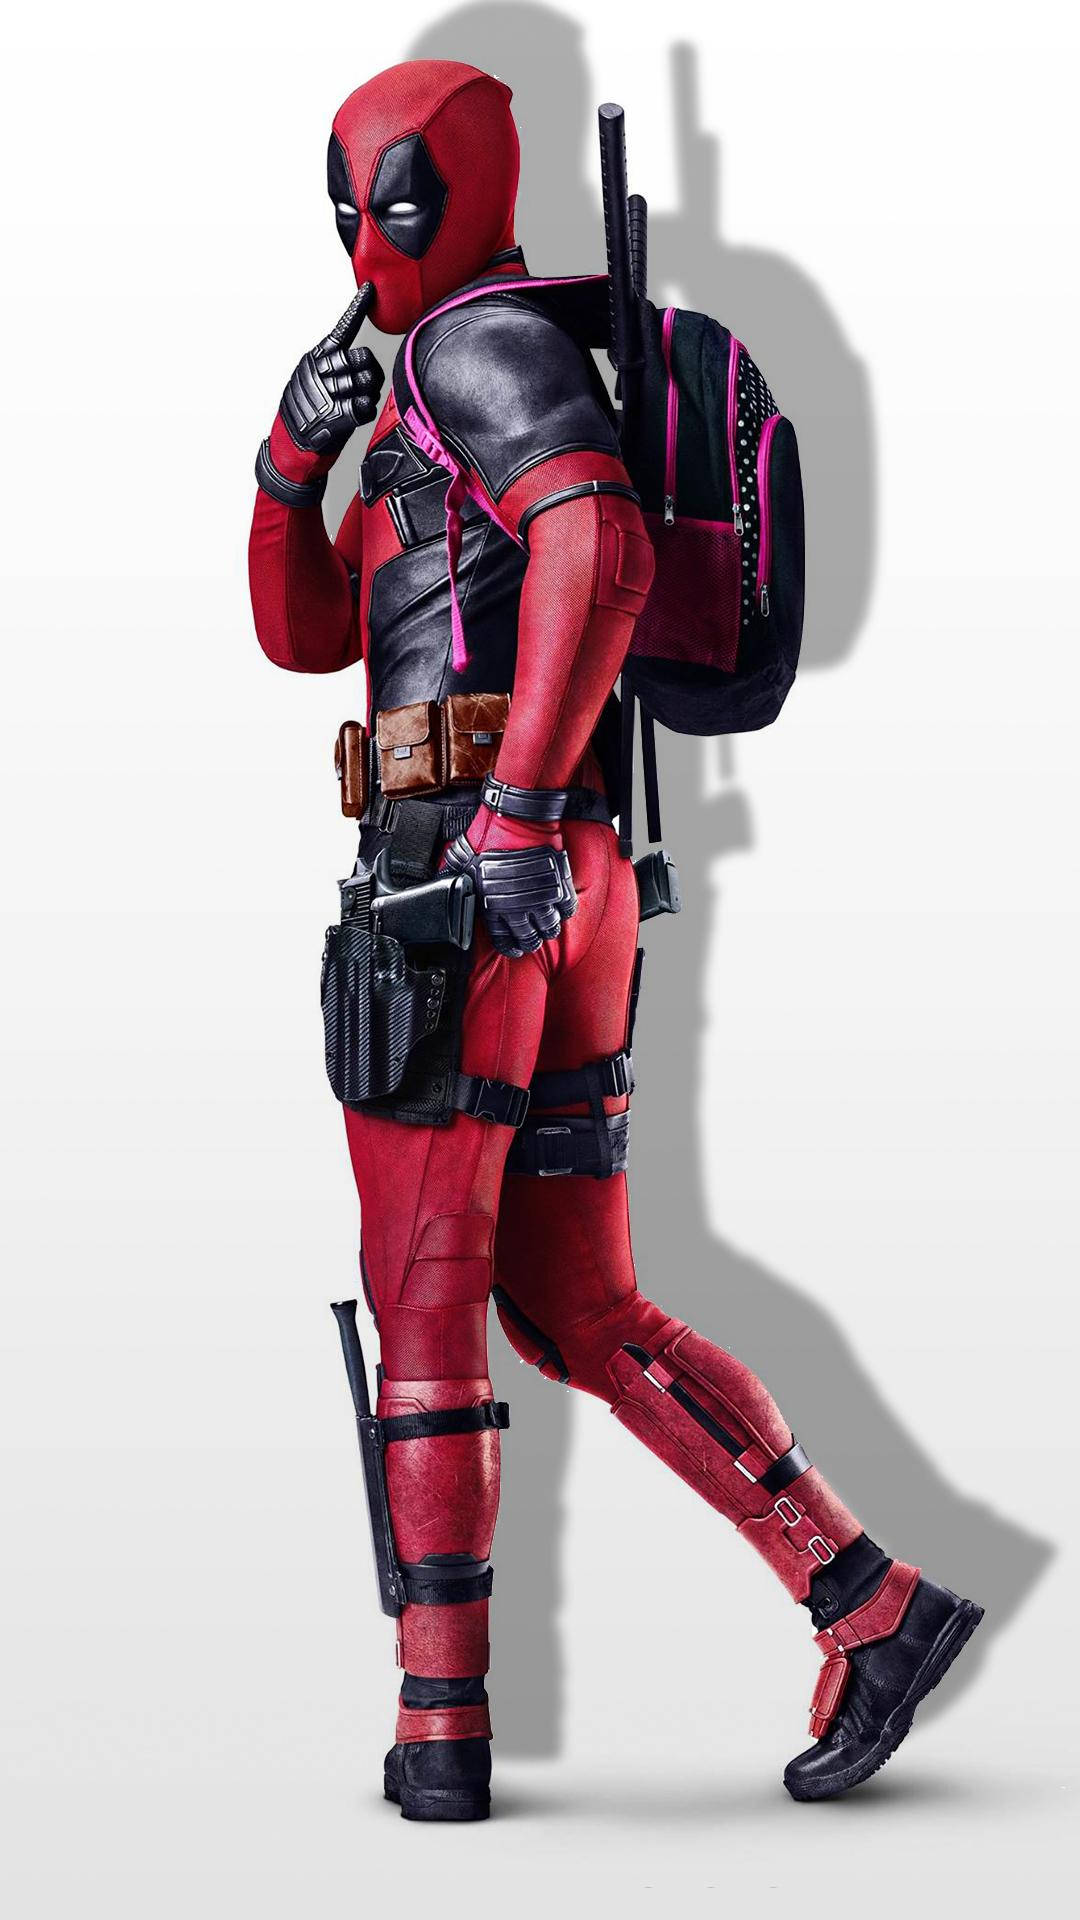 1080p Hd Deadpool With Girly Backpack Background